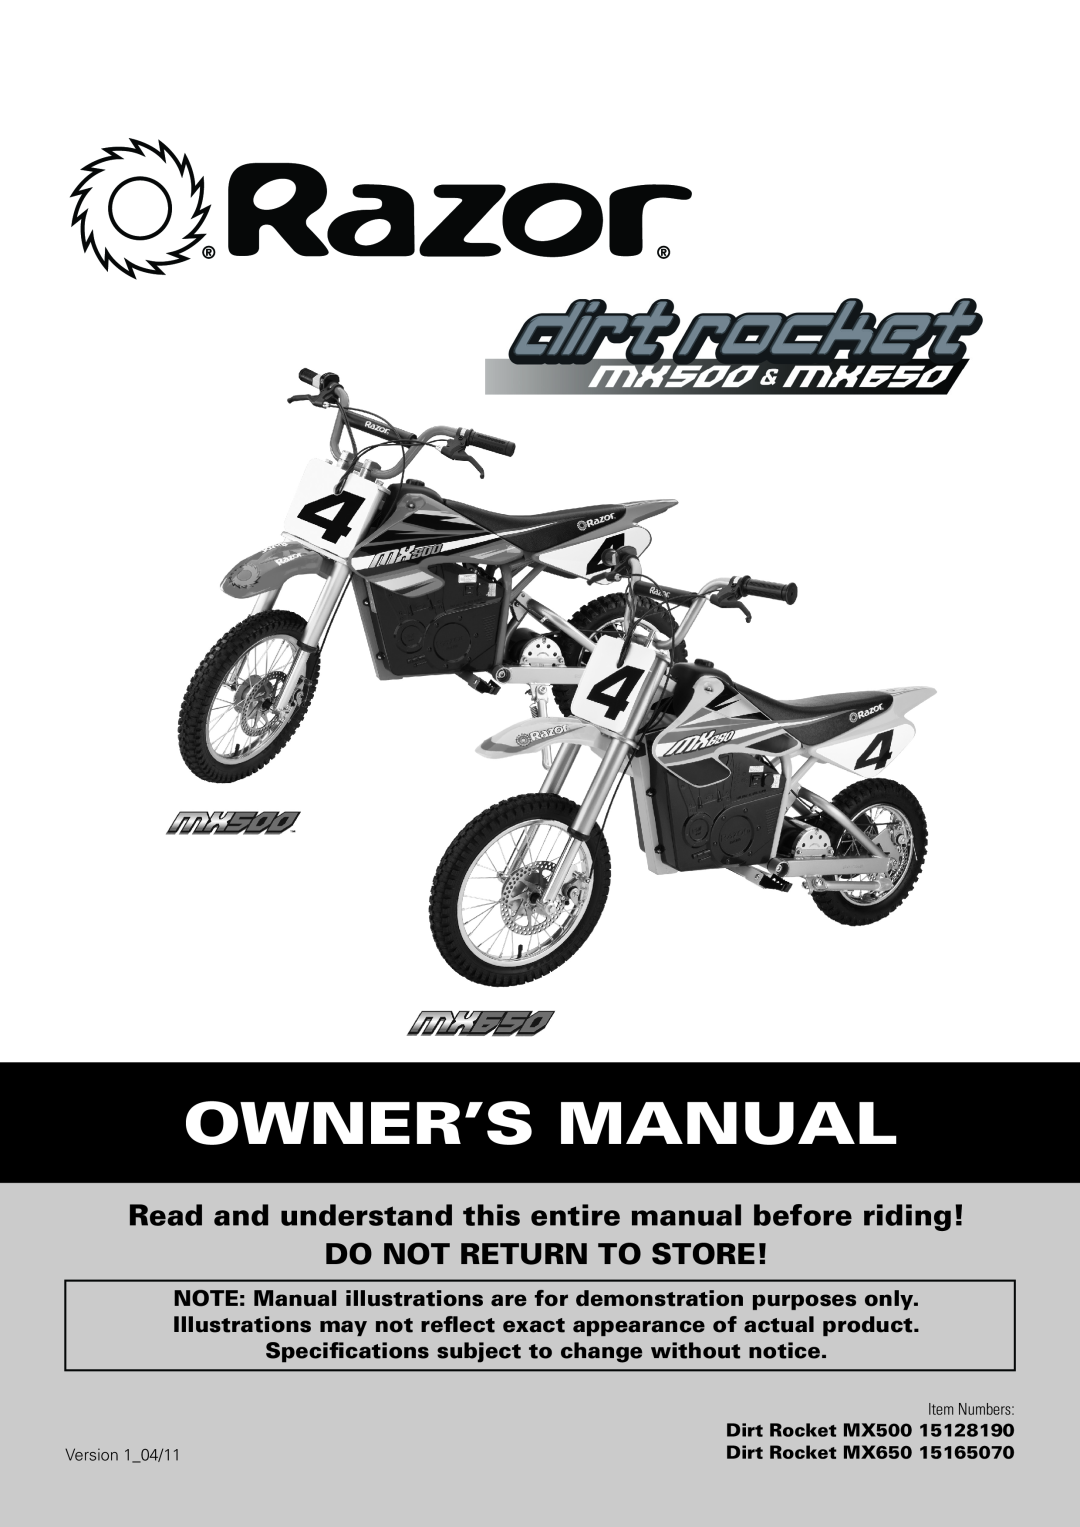 Razor owner manual Specifications subject to change without notice, Dirt Rocket MX500, Dirt Rocket MX650 